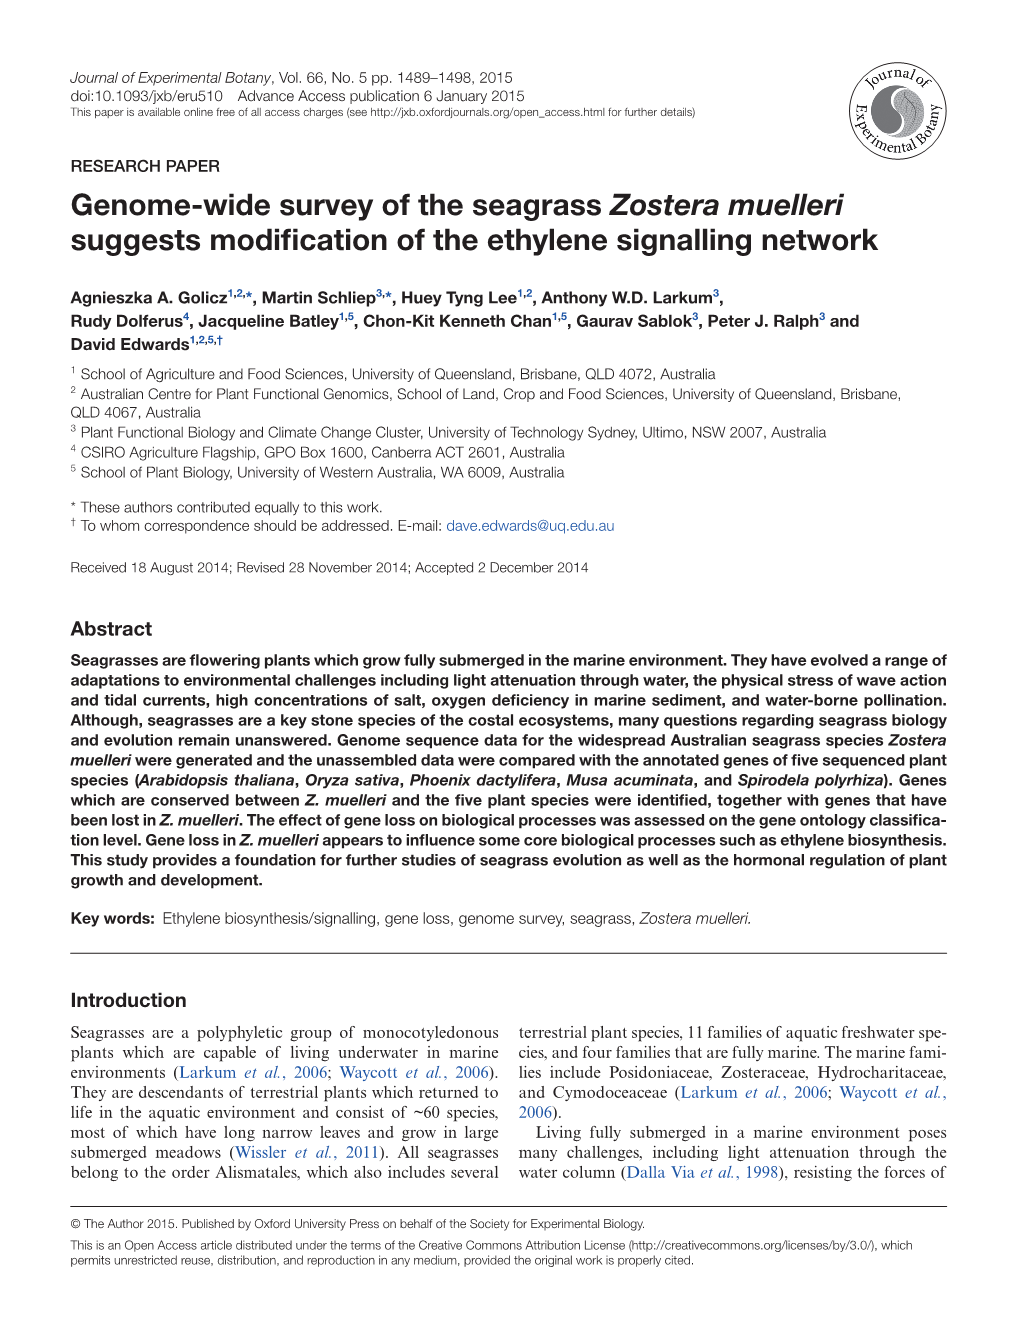 Genome-Wide Survey of the Seagrass Zostera Muelleri Suggests Modification of the Ethylene Signalling Network